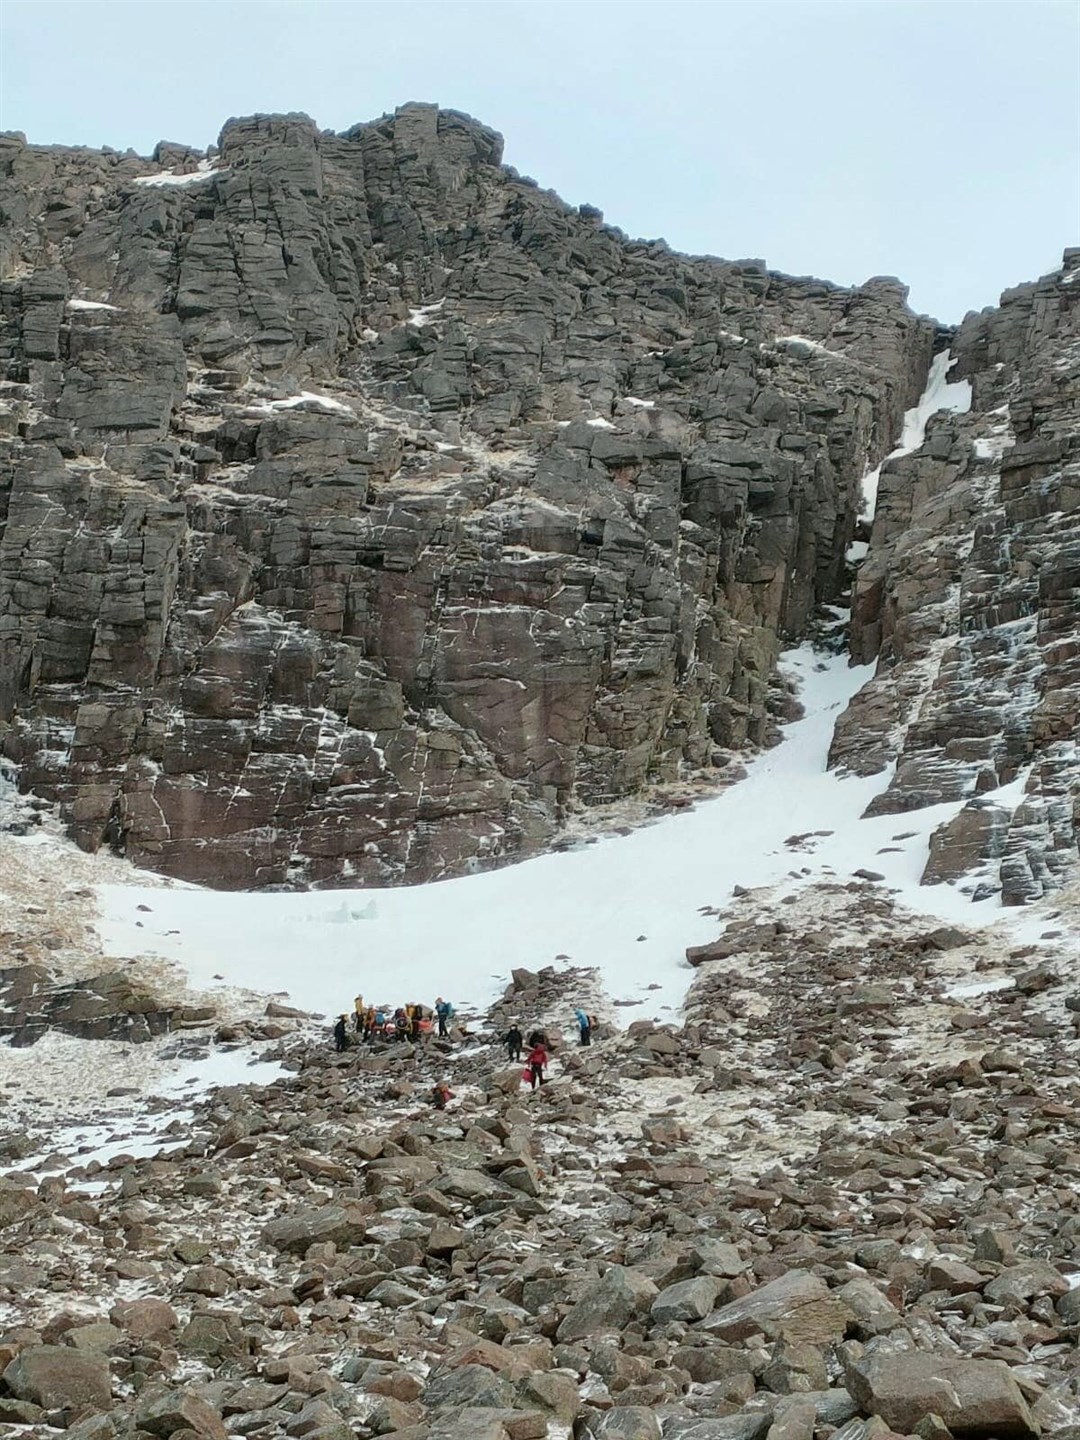 The scene of the climbing accident in Coire an t-Sneachda.